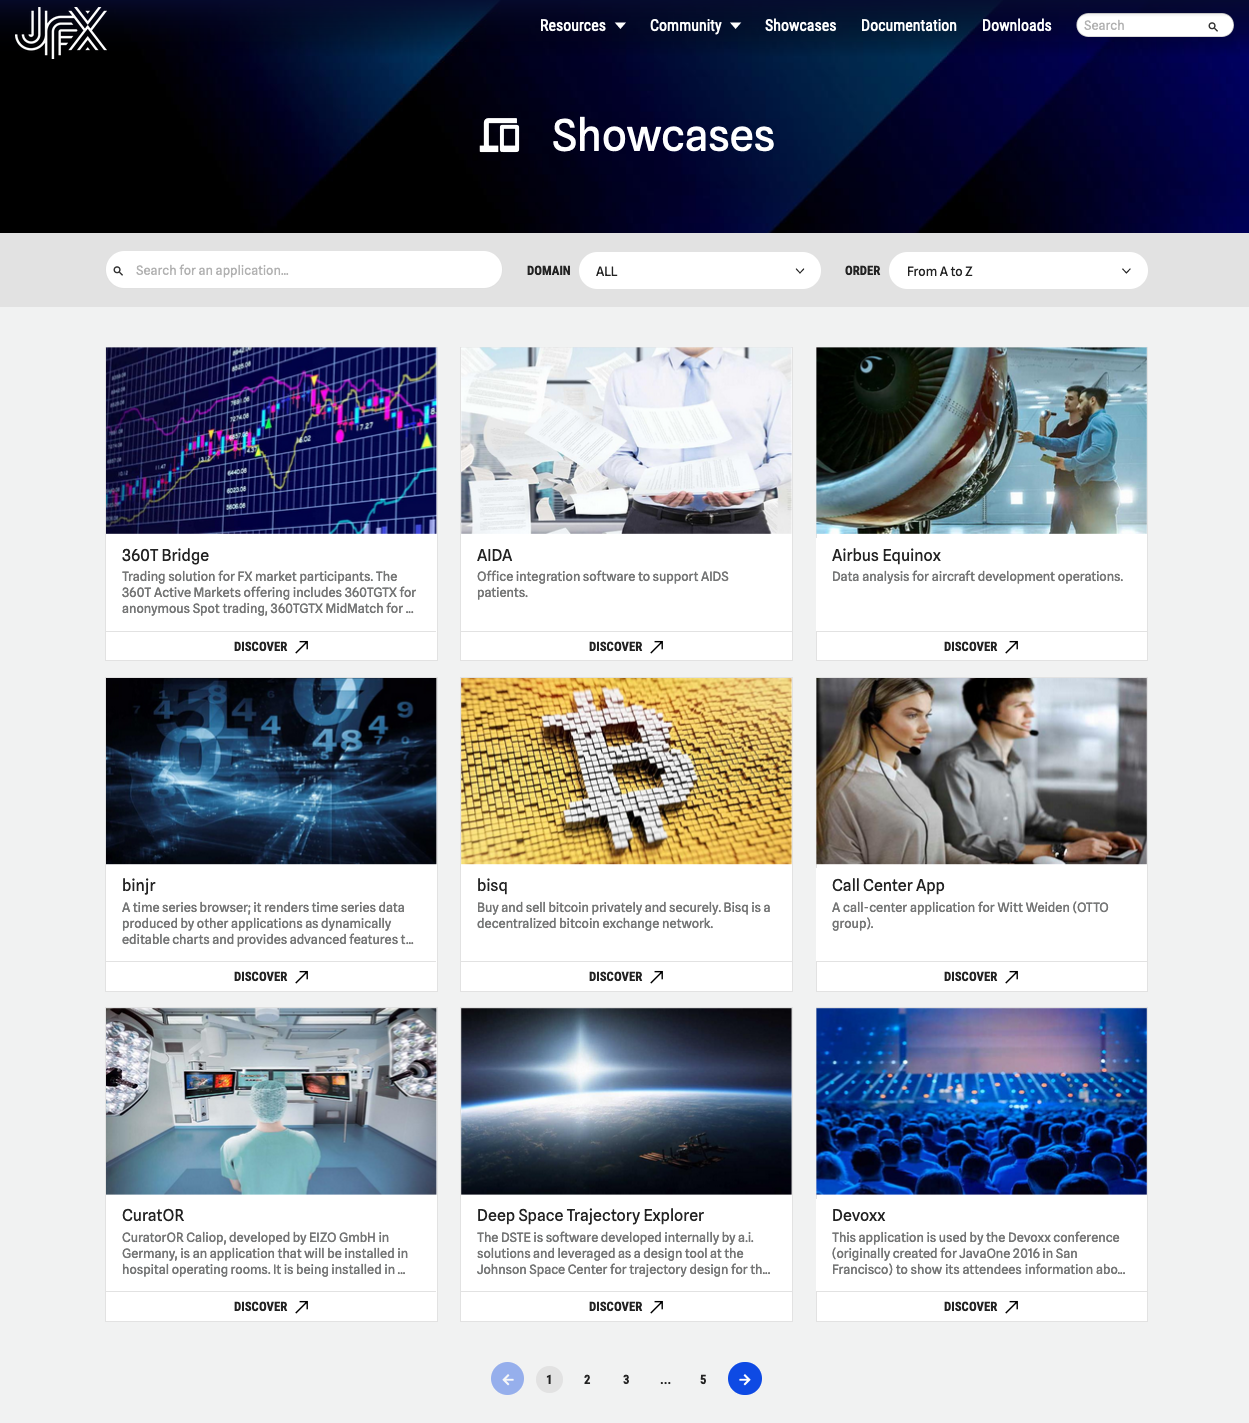 Showcases on JFX Central